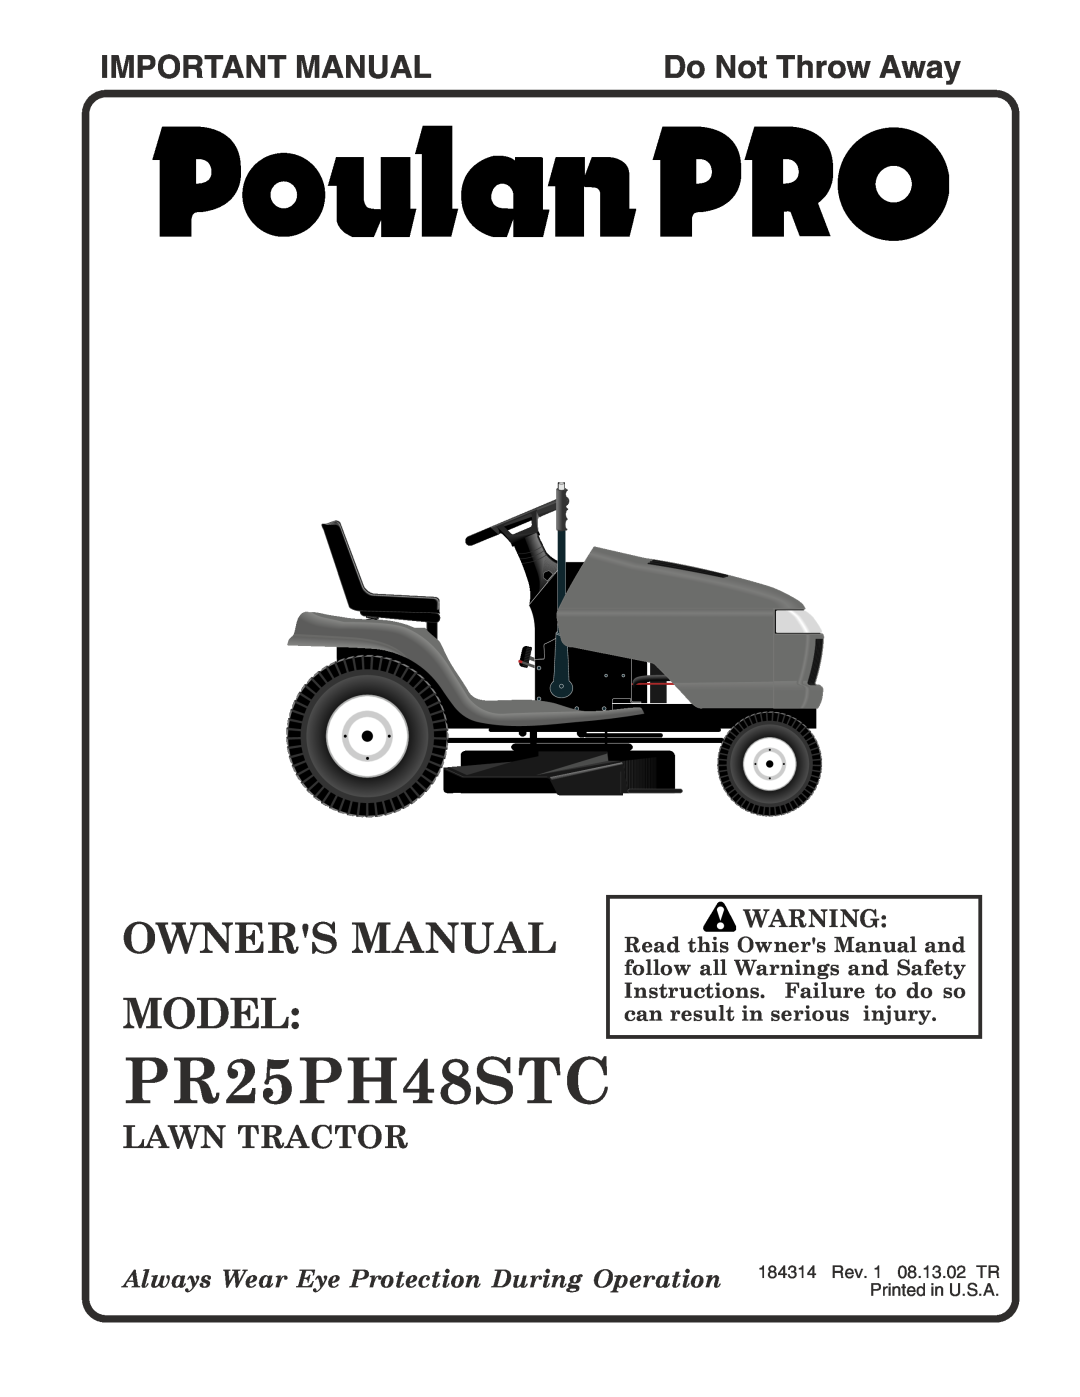 Poulan PR25PH48STC owner manual Important Manual, Lawn Tractor, Do Not Throw Away 